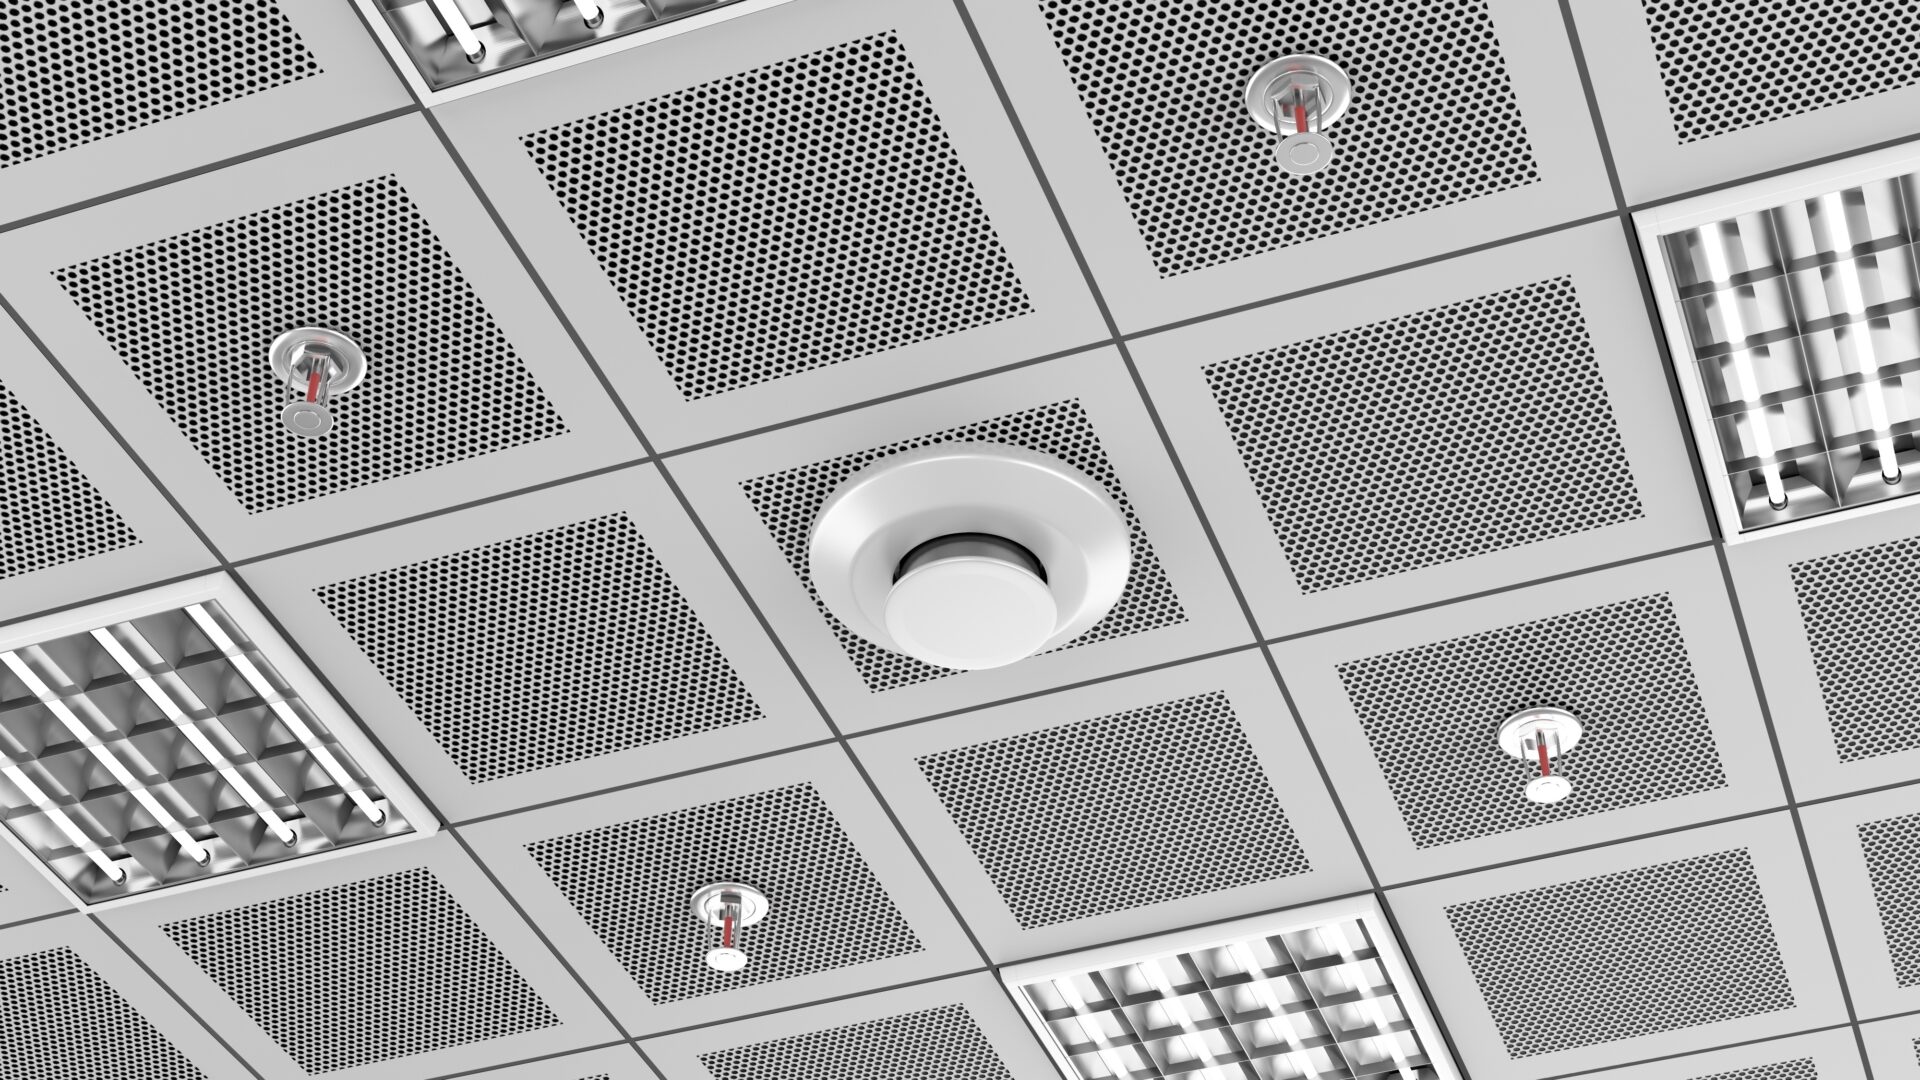 A ceiling with many speakers and lights on it